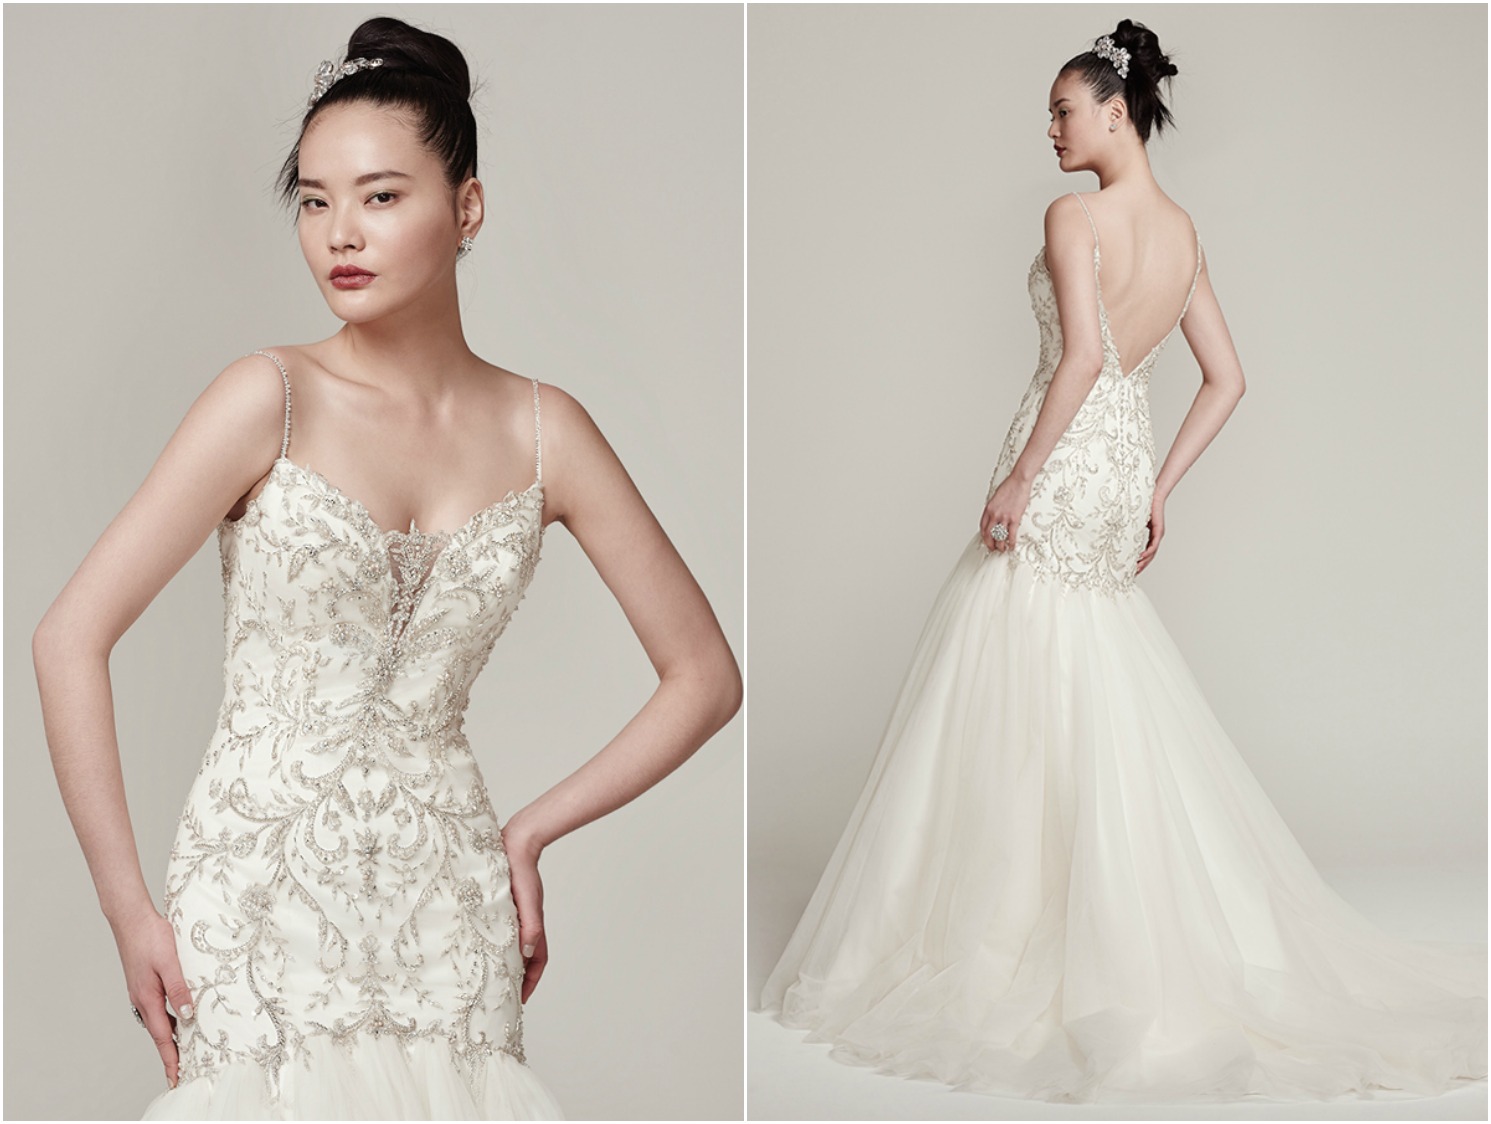 An elaborately embroidered bodice with Swarovski crystals and beading meets a soft tulle skirt, creating this updated fit and flare wedding dress. Complete with beaded spaghetti straps, embellished illusion lace V-neckline and plunging V-back. Finished with crystal buttons over zipper closure. 

<a href="https://www.maggiesottero.com/sottero-and-midgley/thaylia/9887" target="_blank">Sottero &amp; Midgley</a>